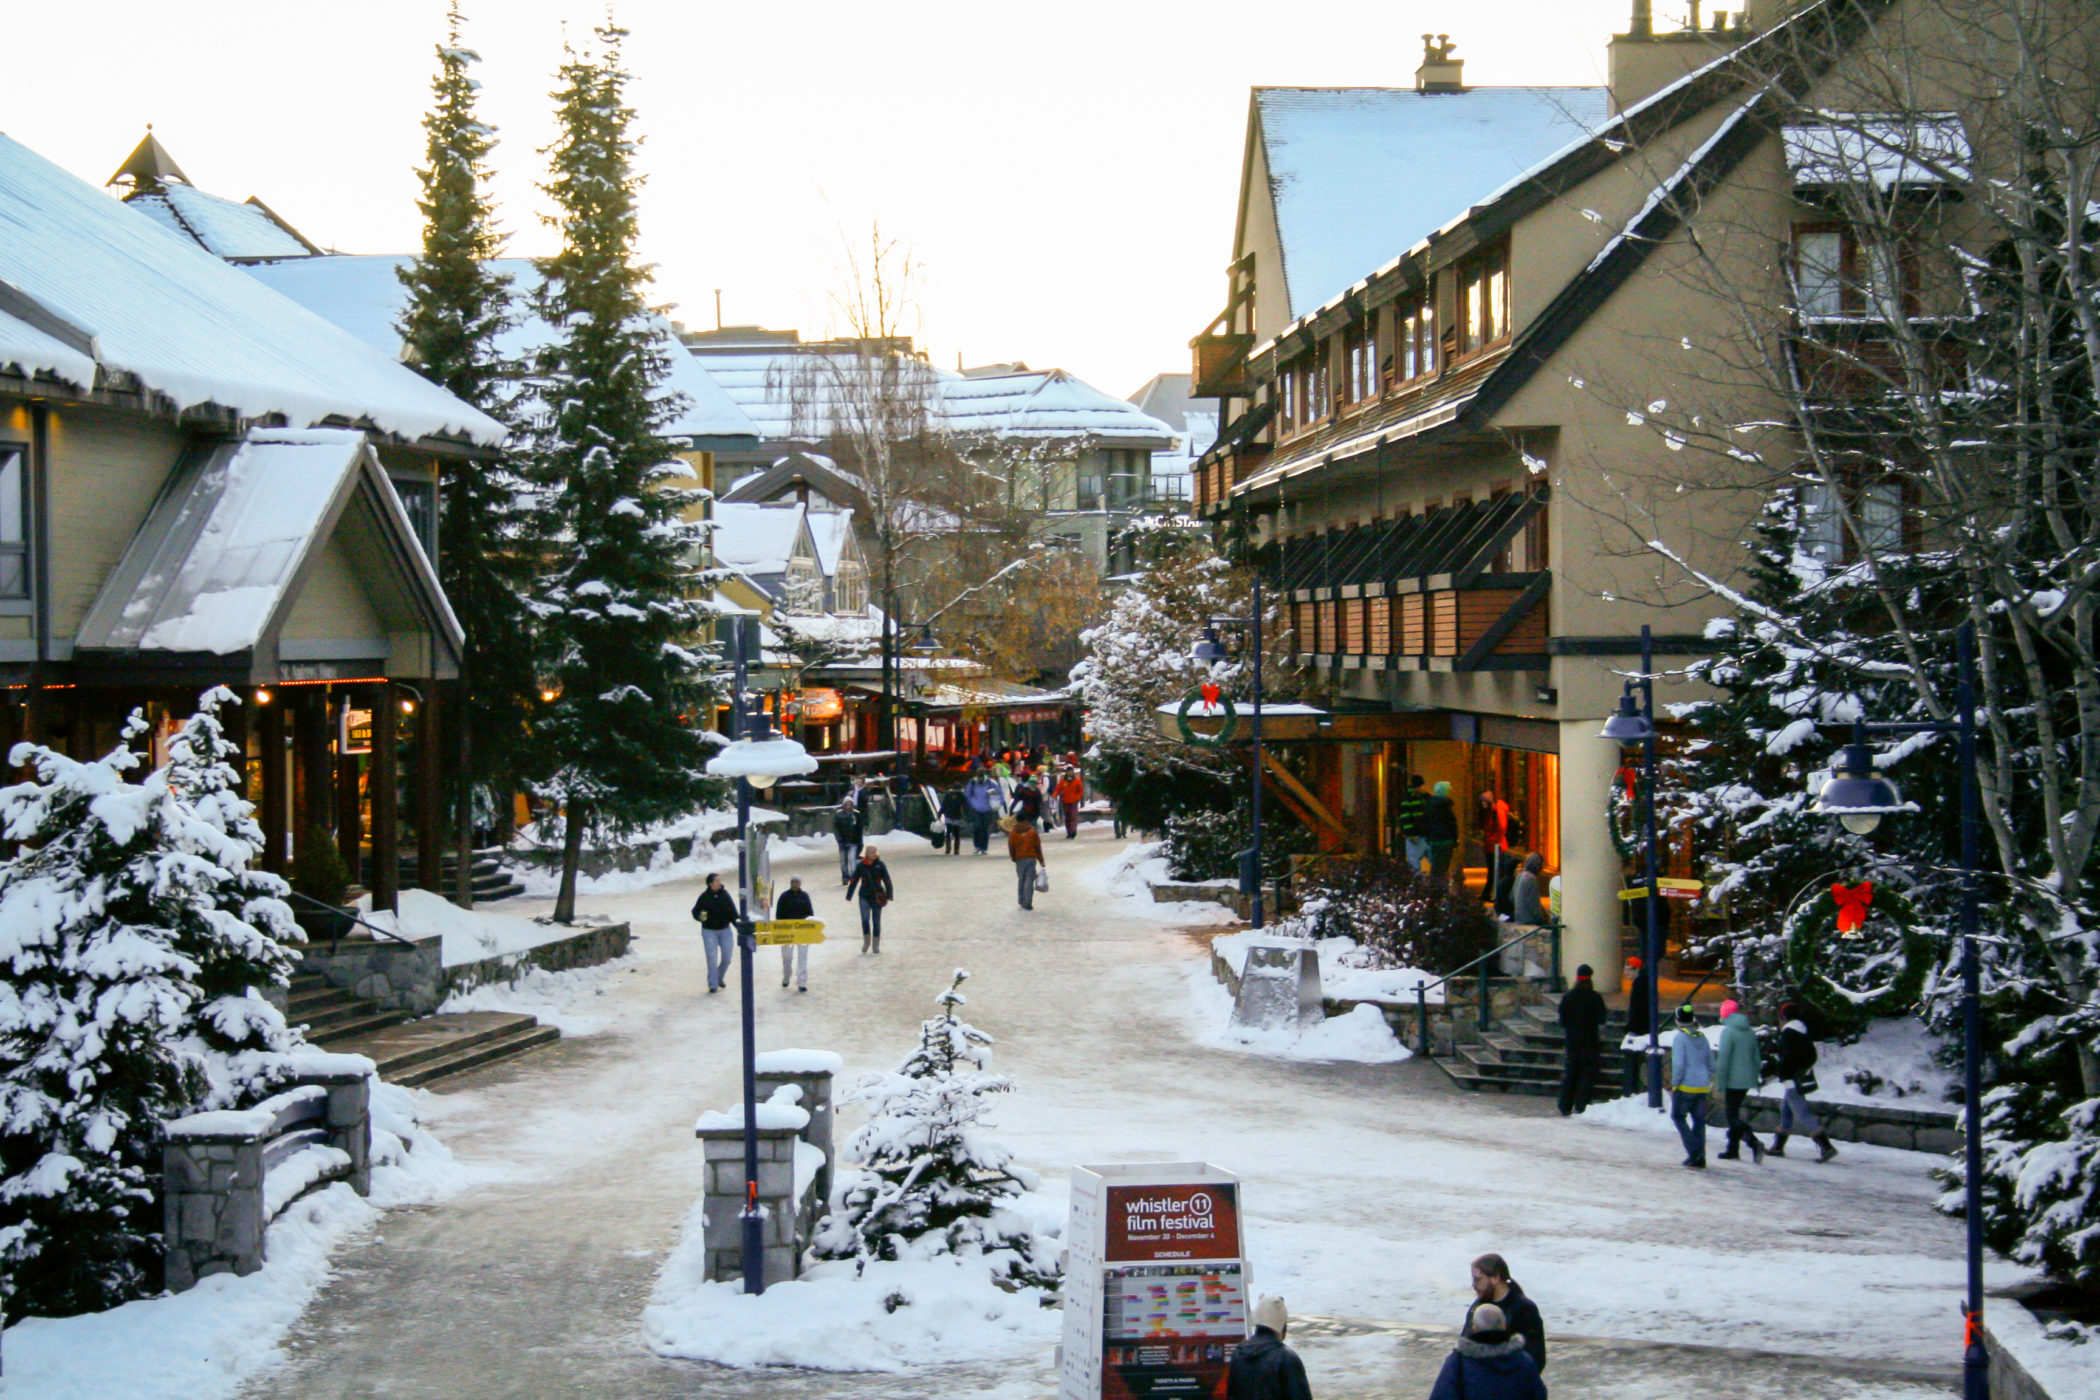 Whistler, BC / Canada. 11/30/11. Whistler village in the winter.